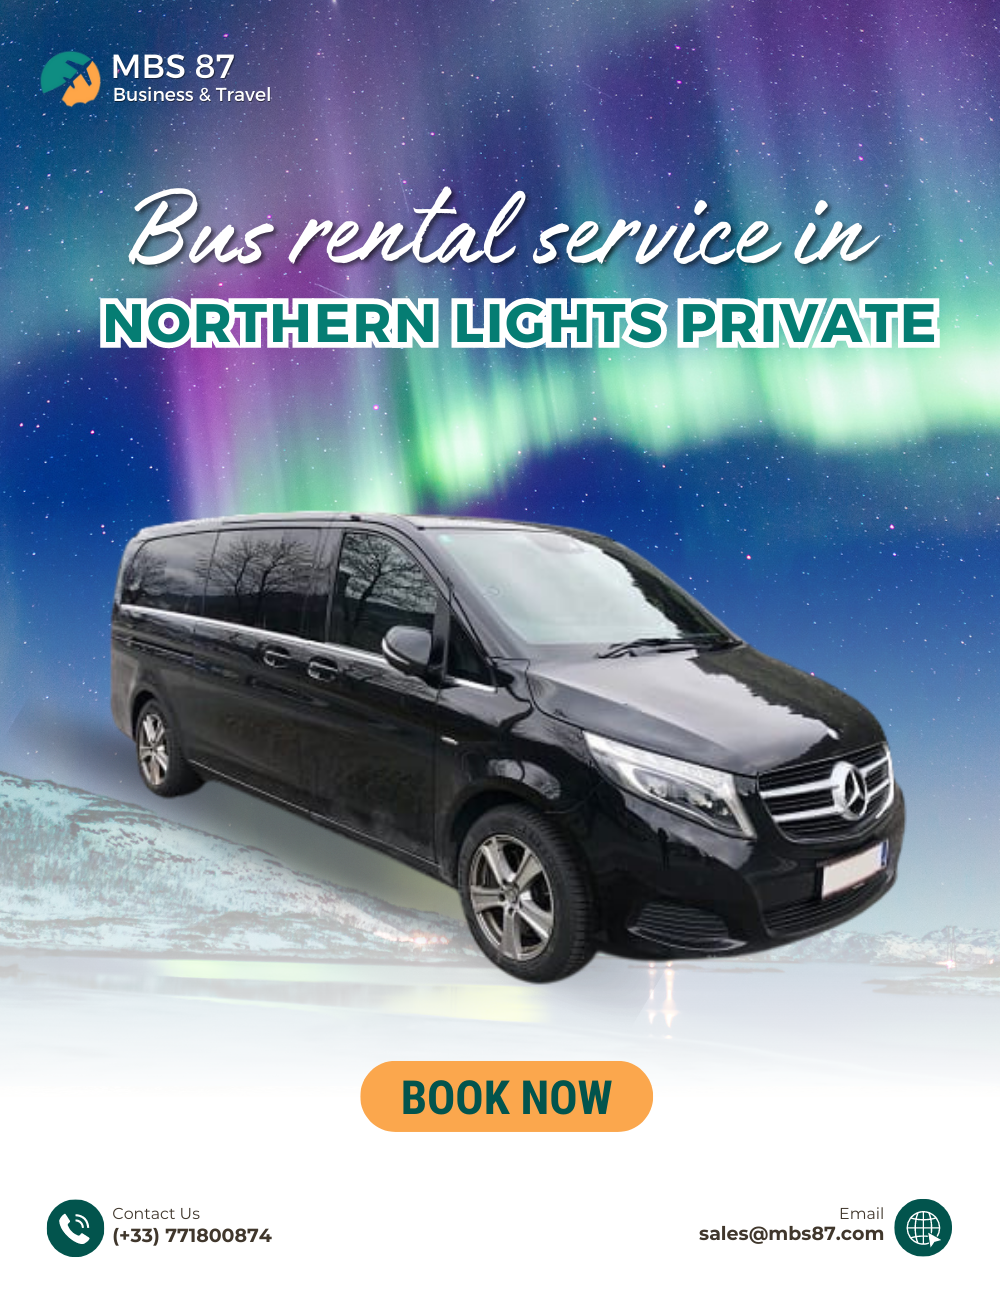 Why Choosing a Bus with Driver is the Best Option for Your Northern Lights Adventure